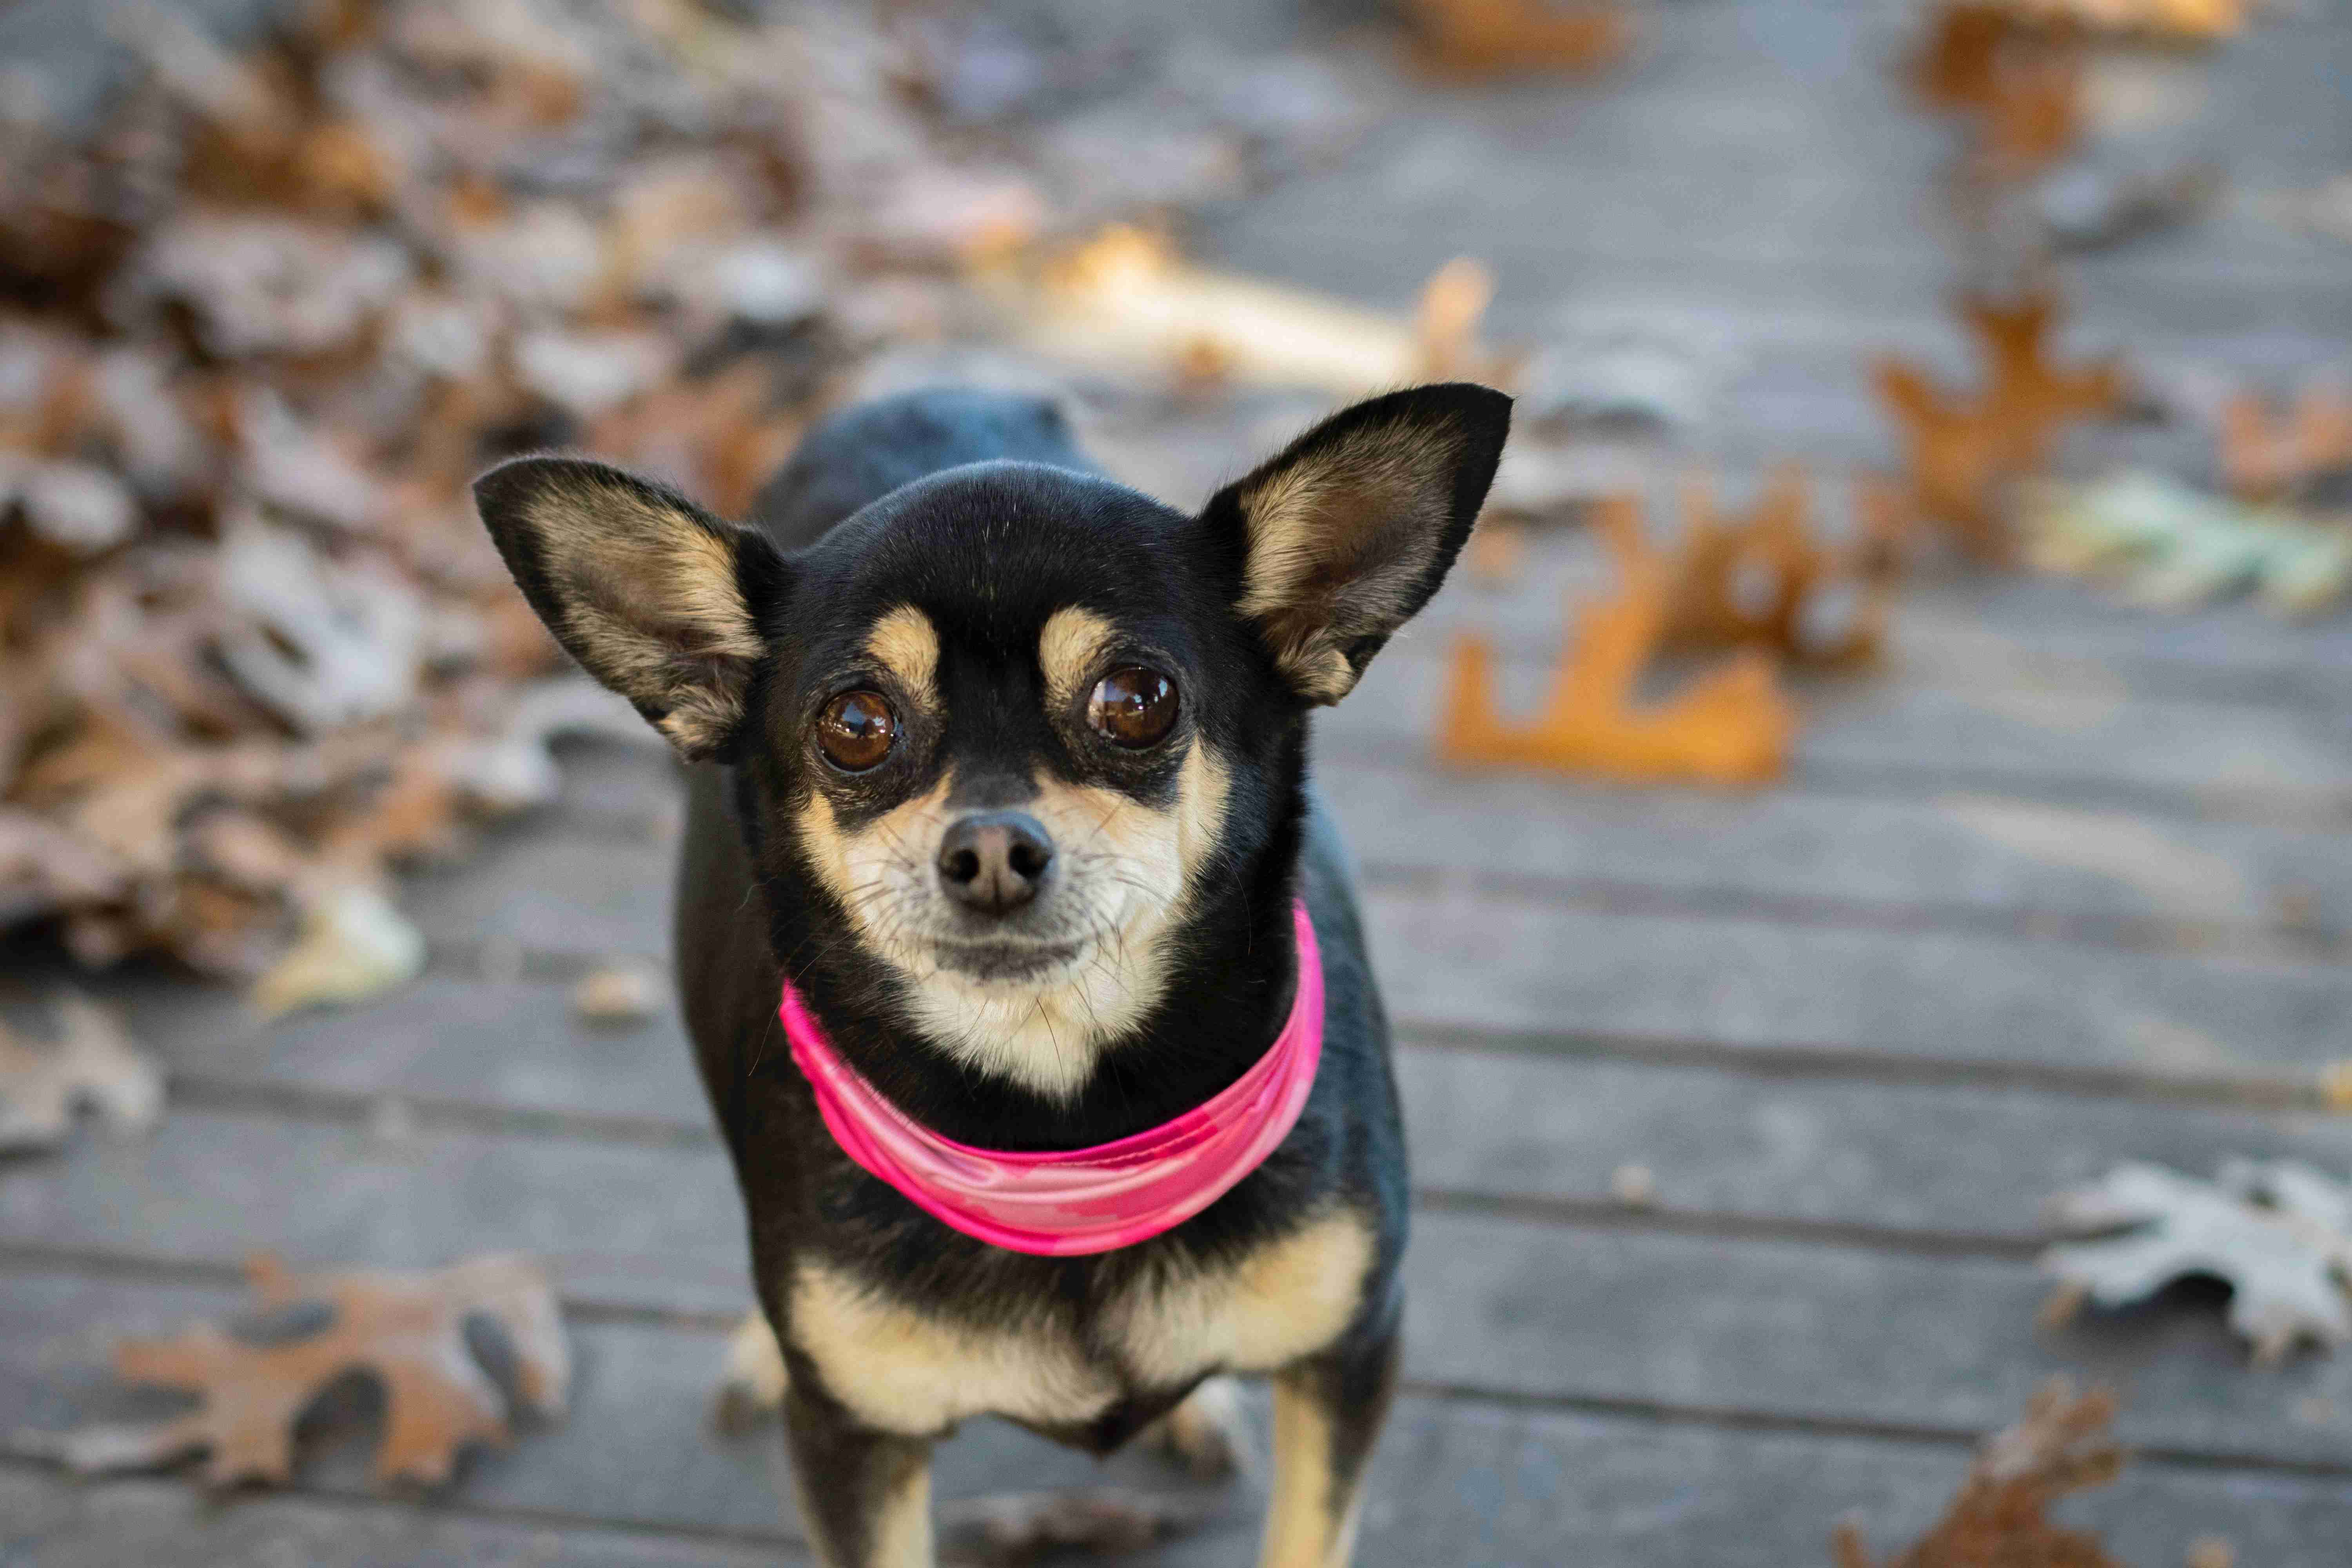 Are there any specific techniques to help a Chihuahua recover from an anger episode more quickly?